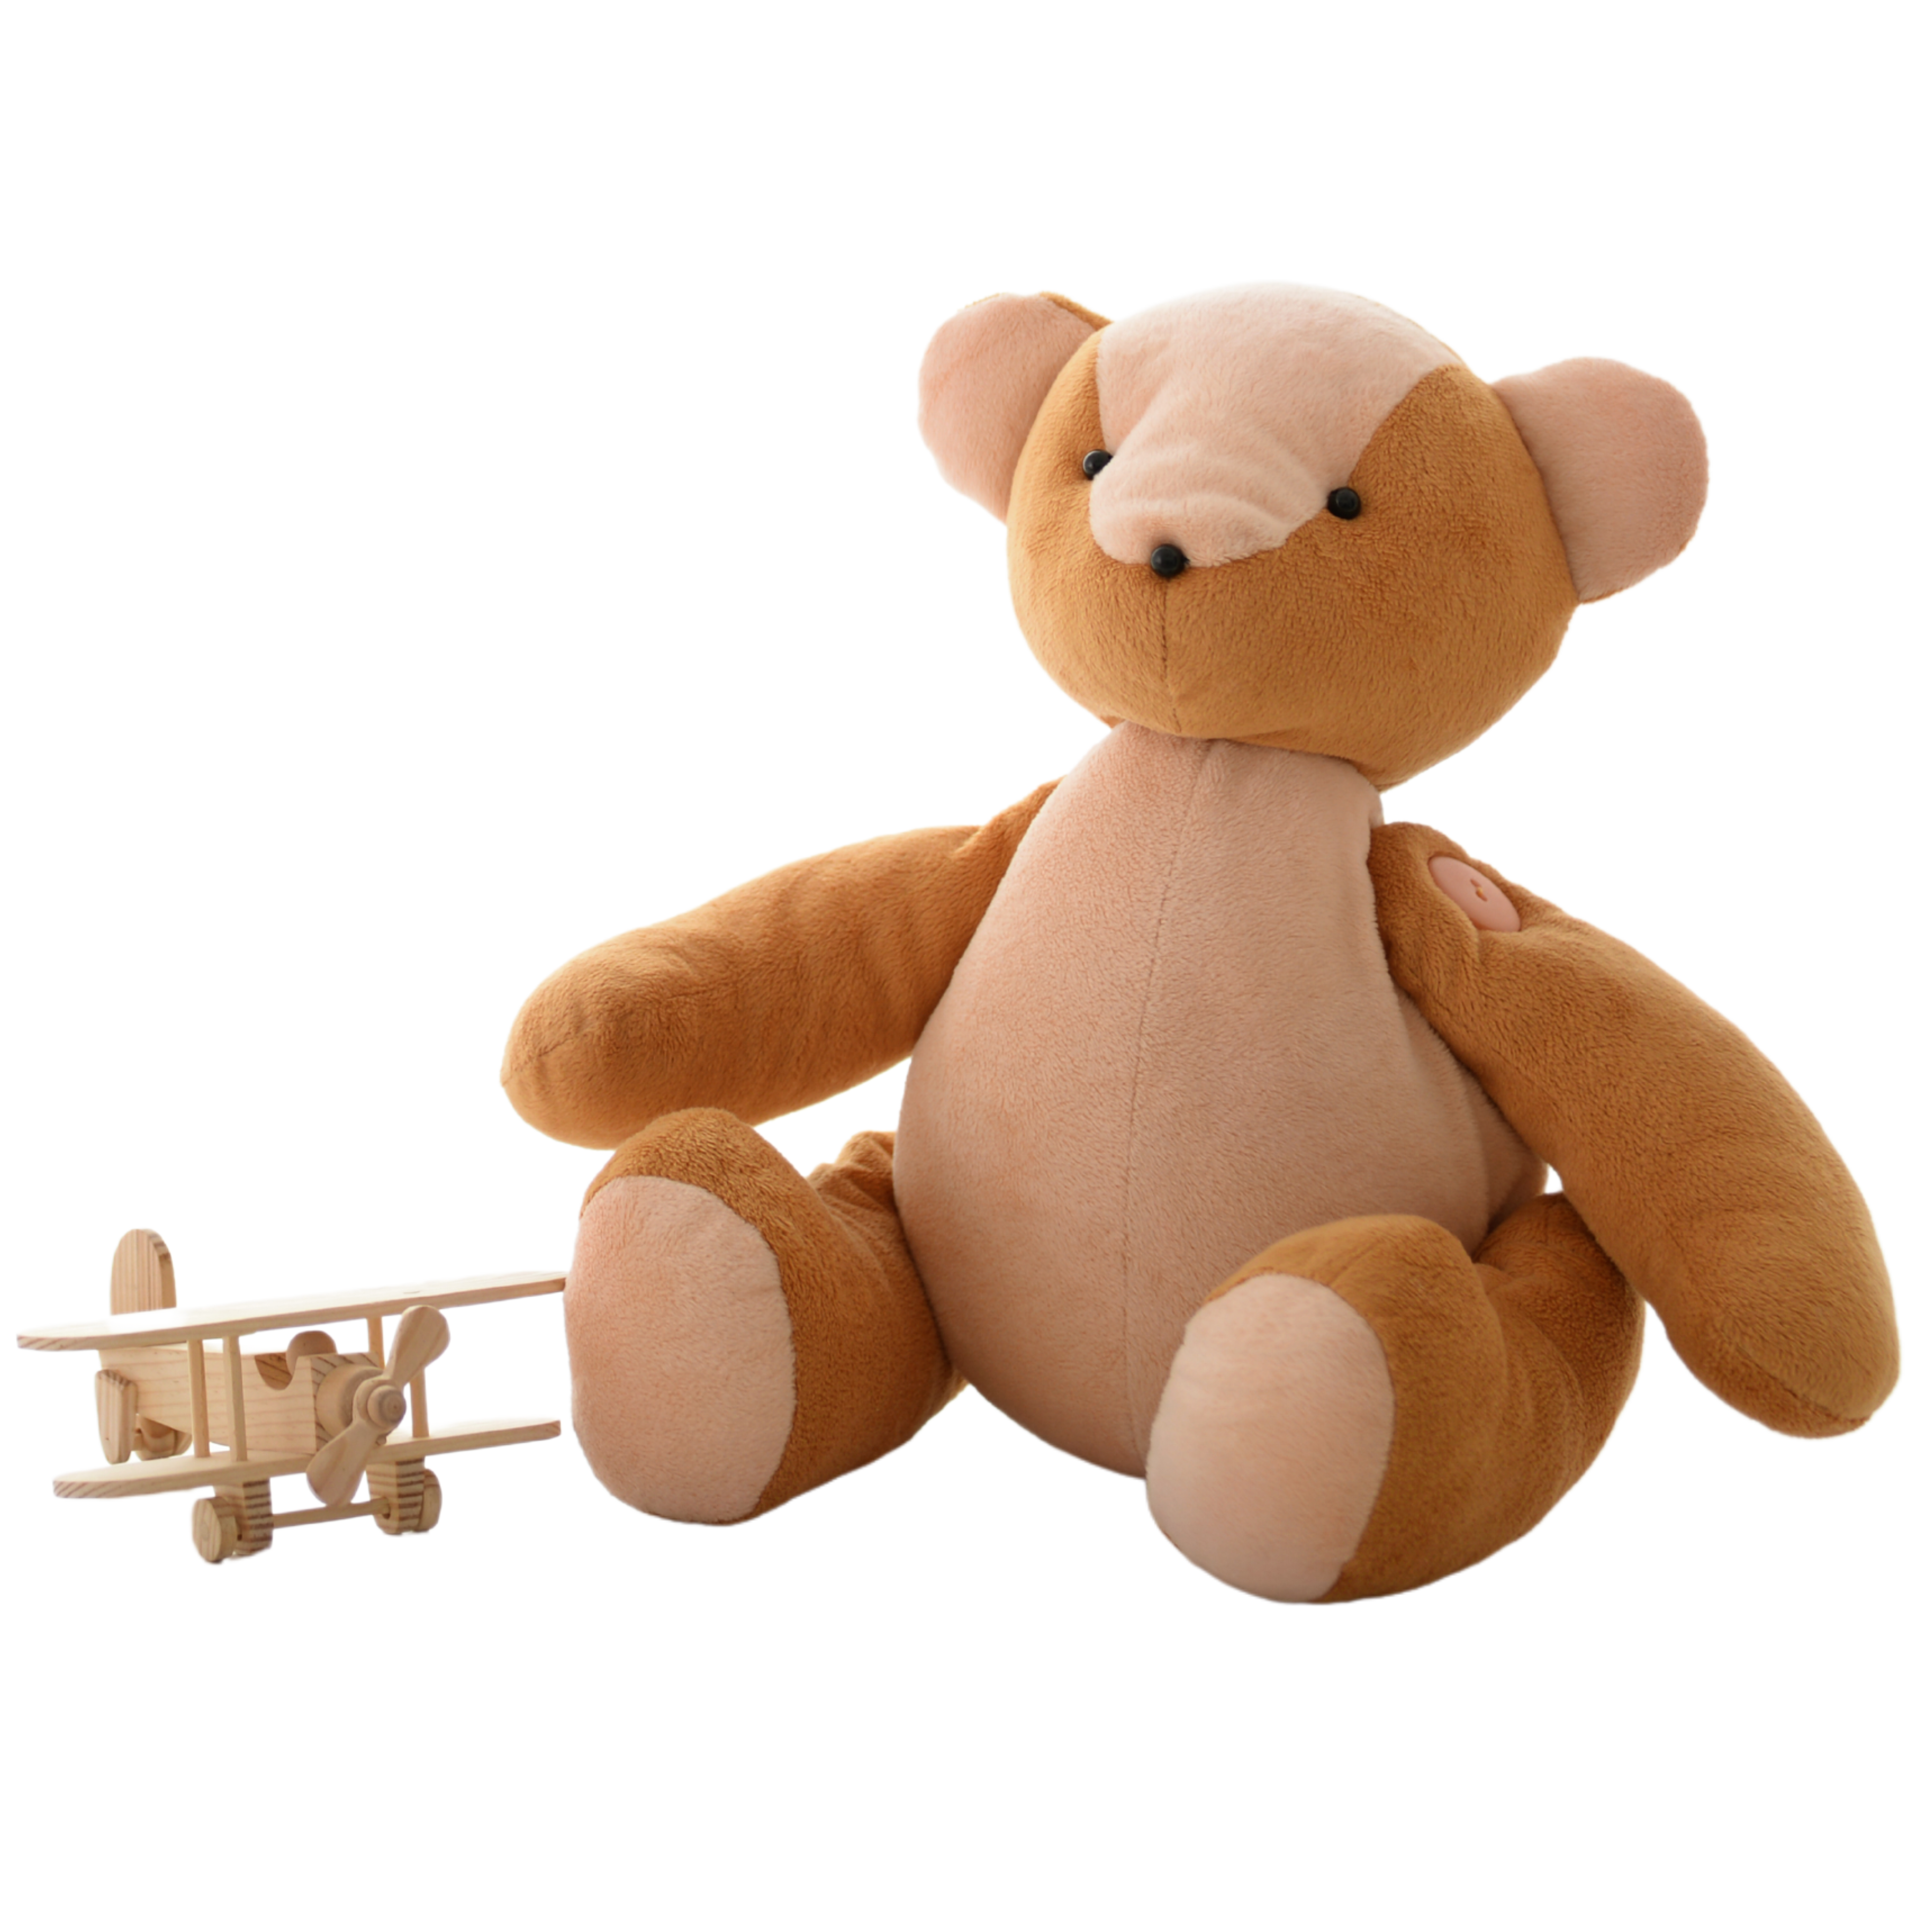 Kids' toy bear and small wooden airplane